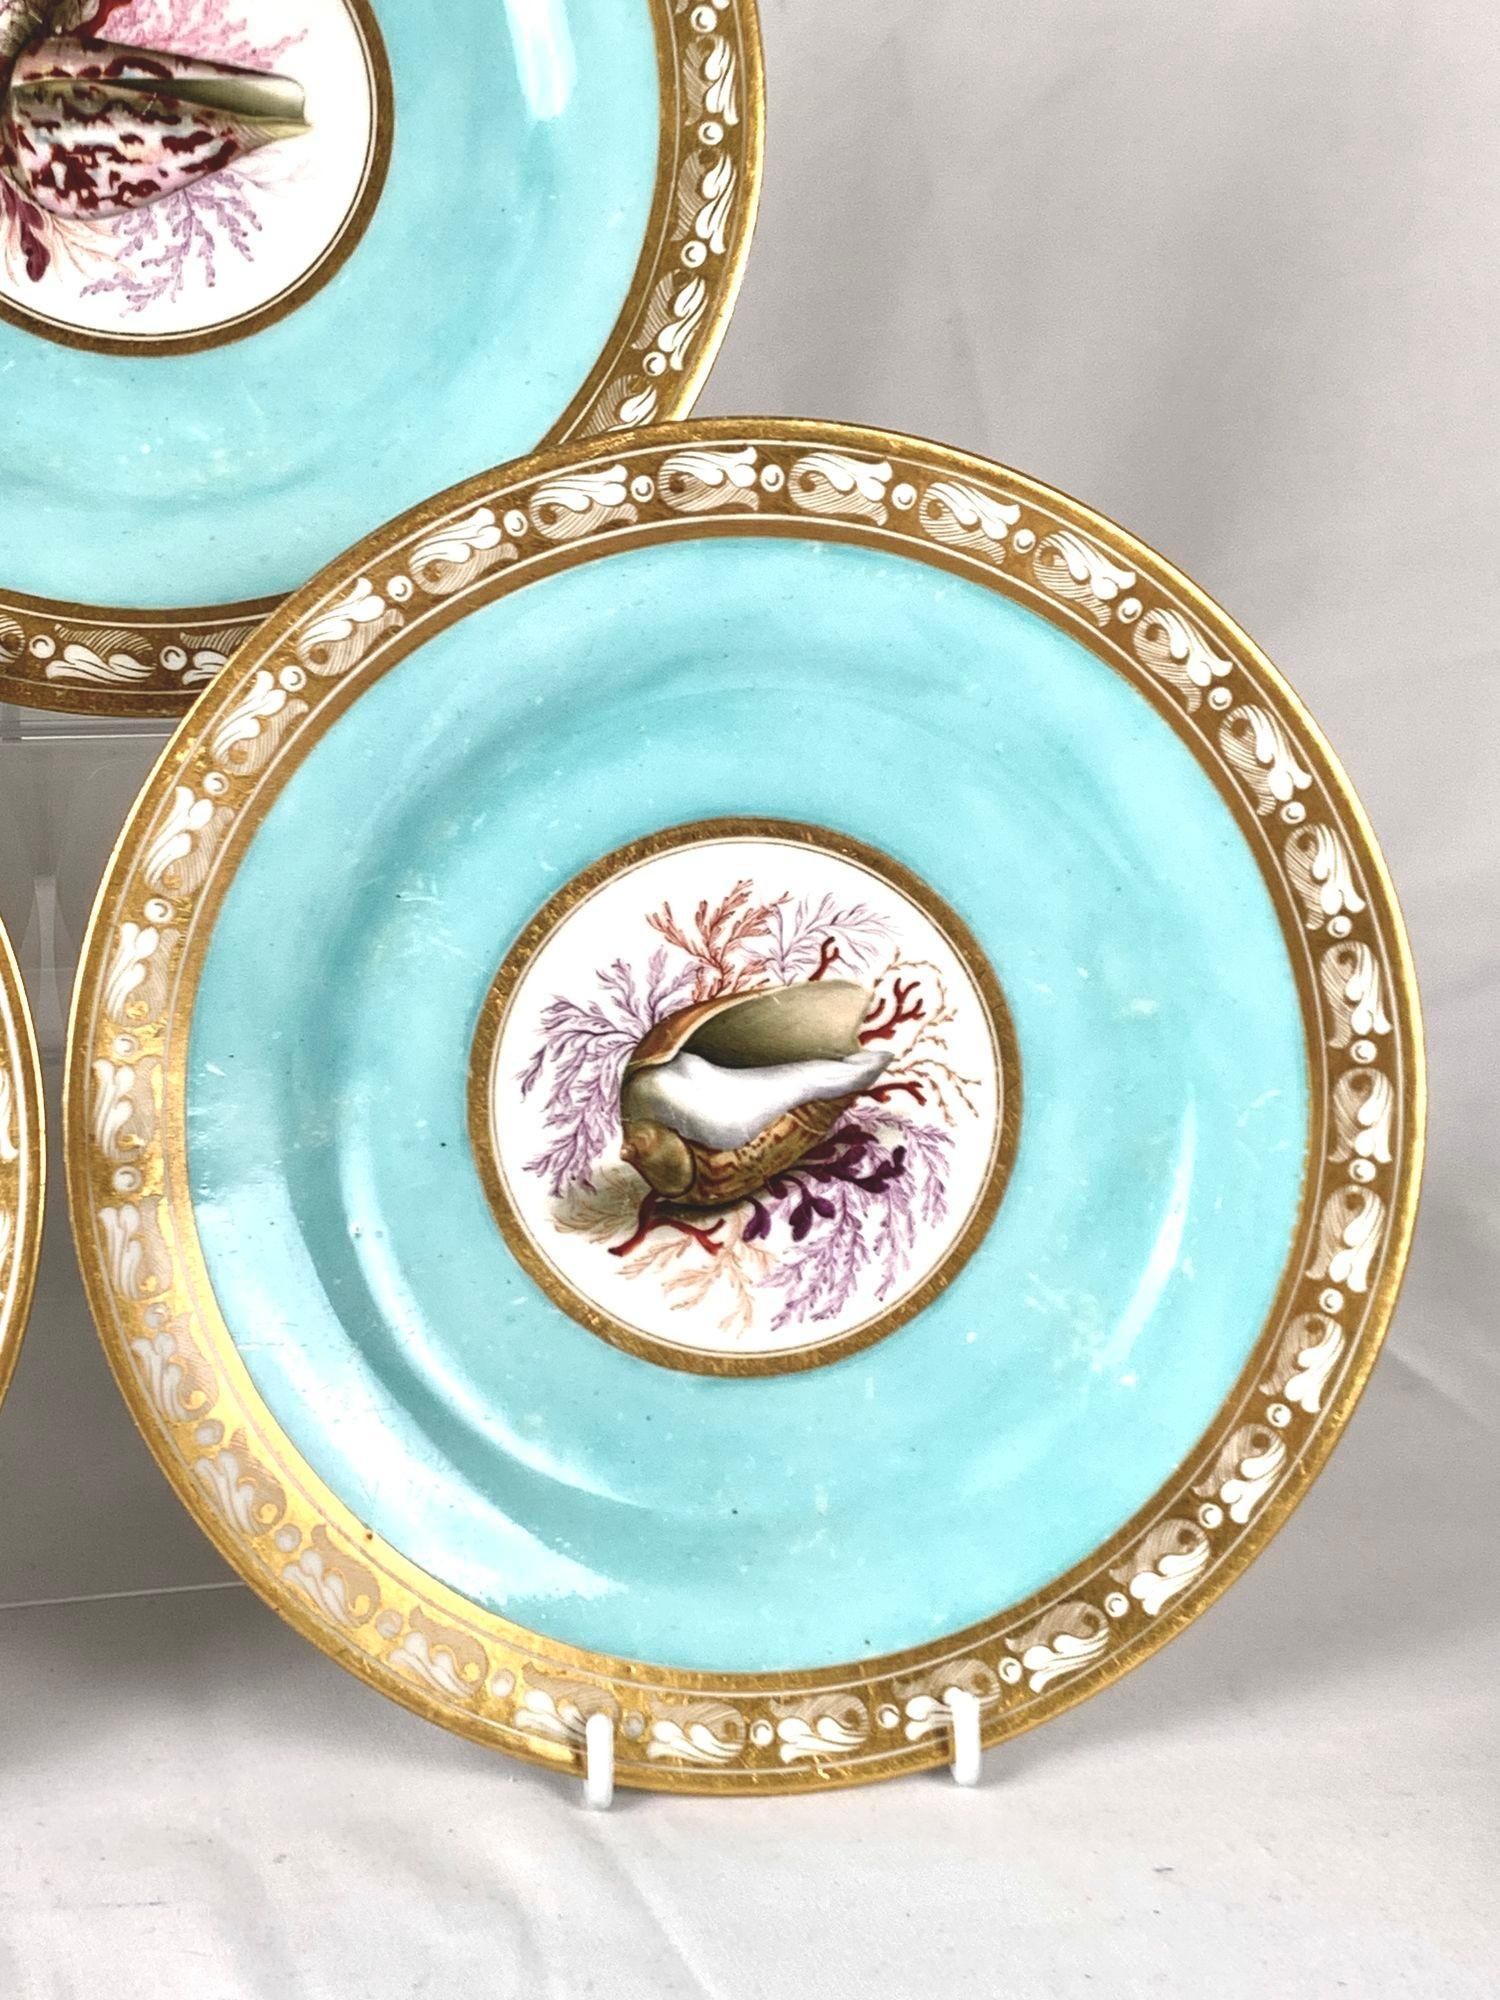 Porcelain Hand Painted Shell Decorated Worcester Plates Set of 5 Flight Barr Barr C-1820 For Sale